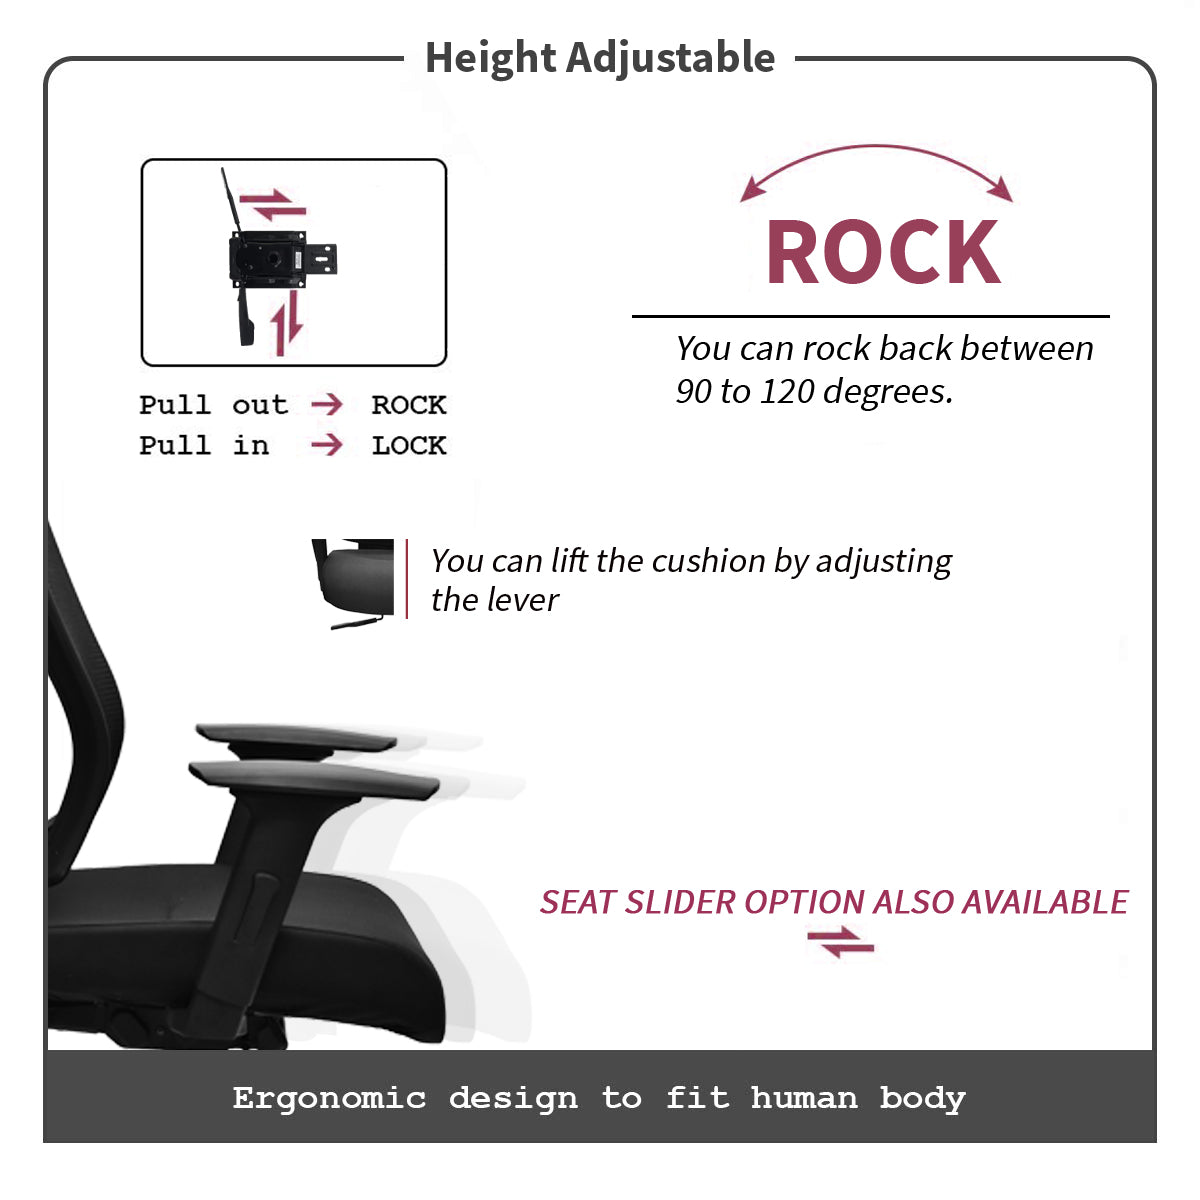 Comfy High Back Chair Executive Chairs - makemychairs